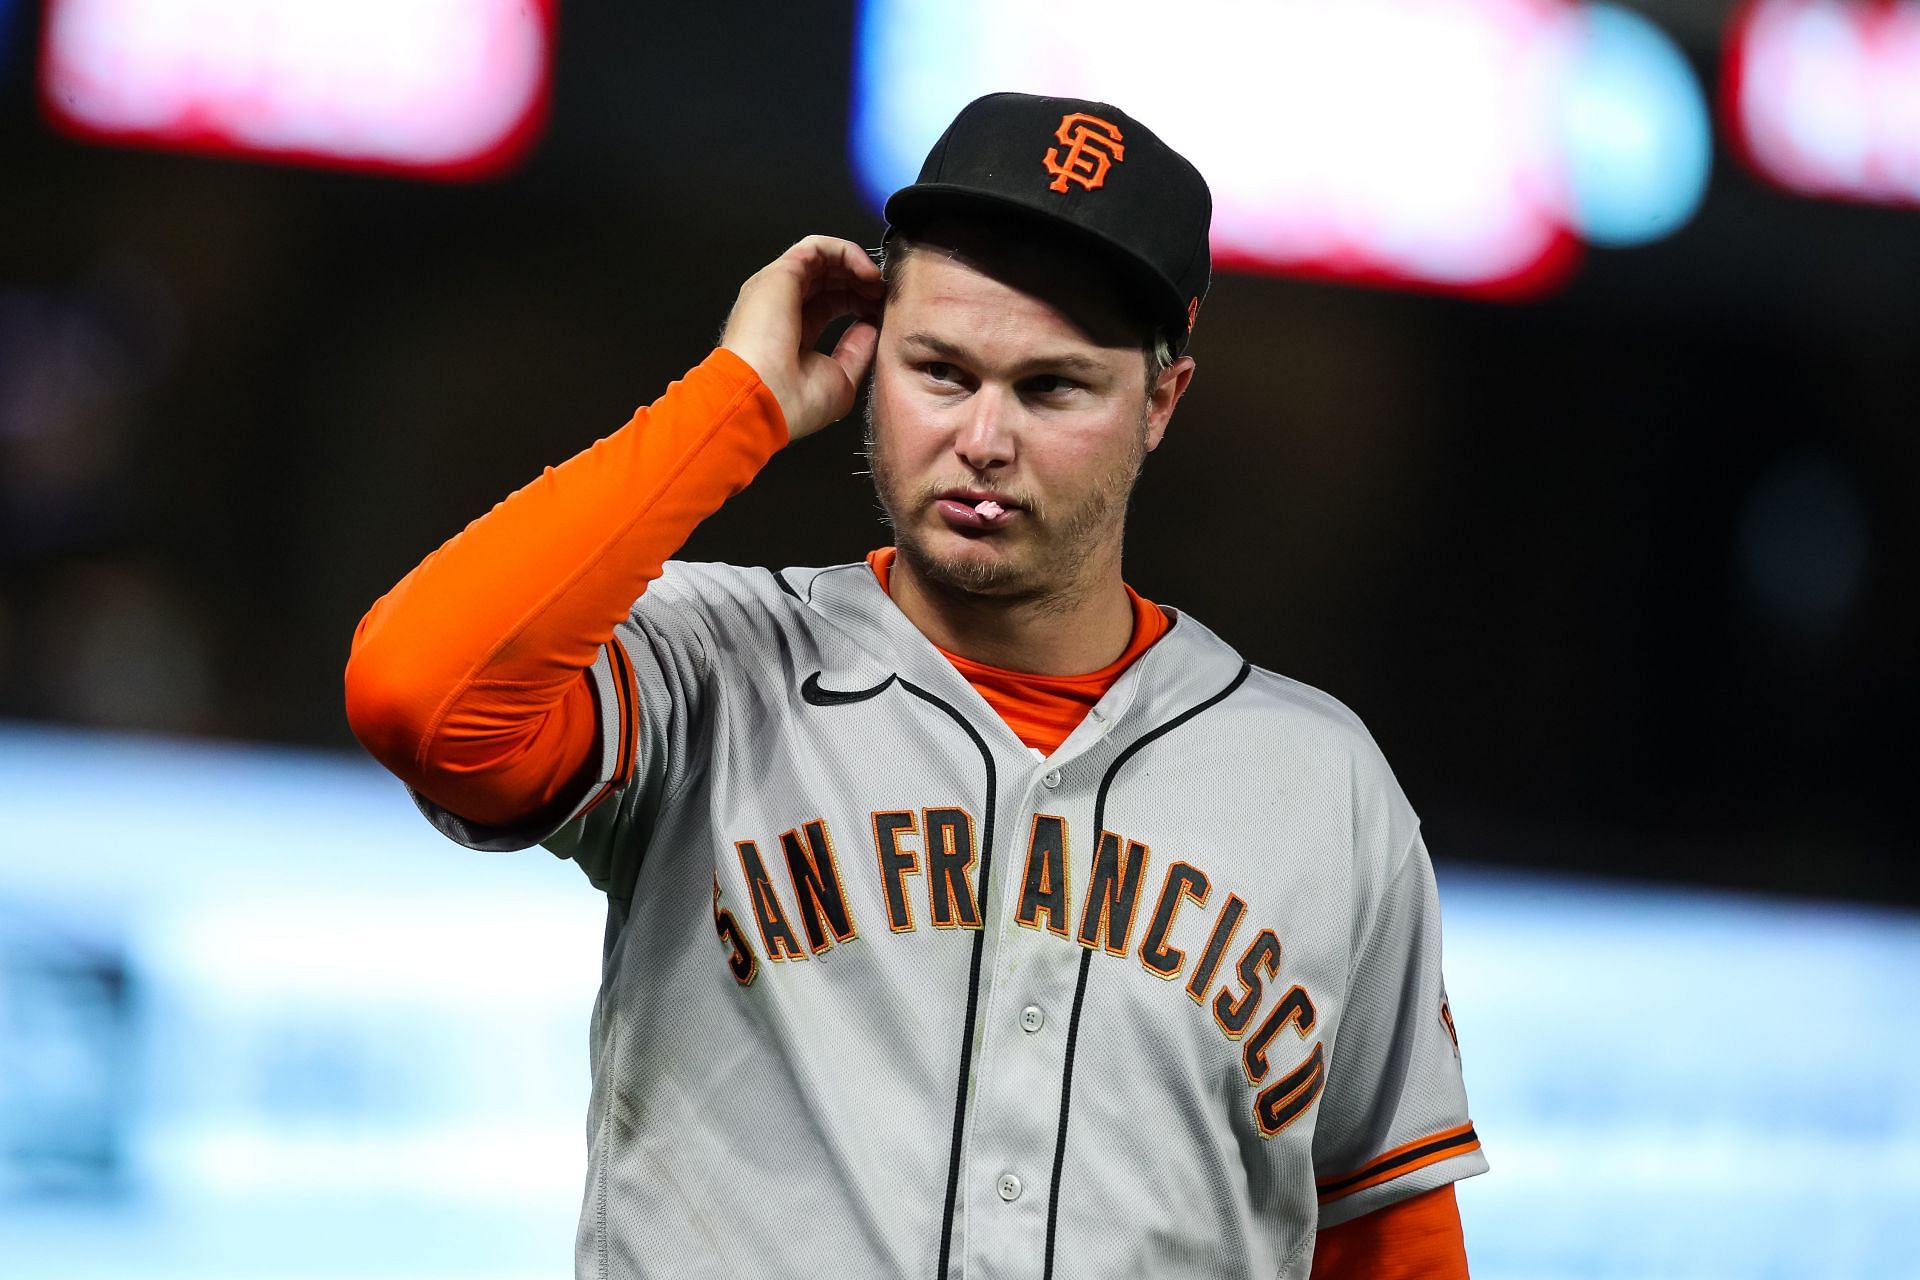 Giants out of NL West race after 'perfect storm of awesome' last year